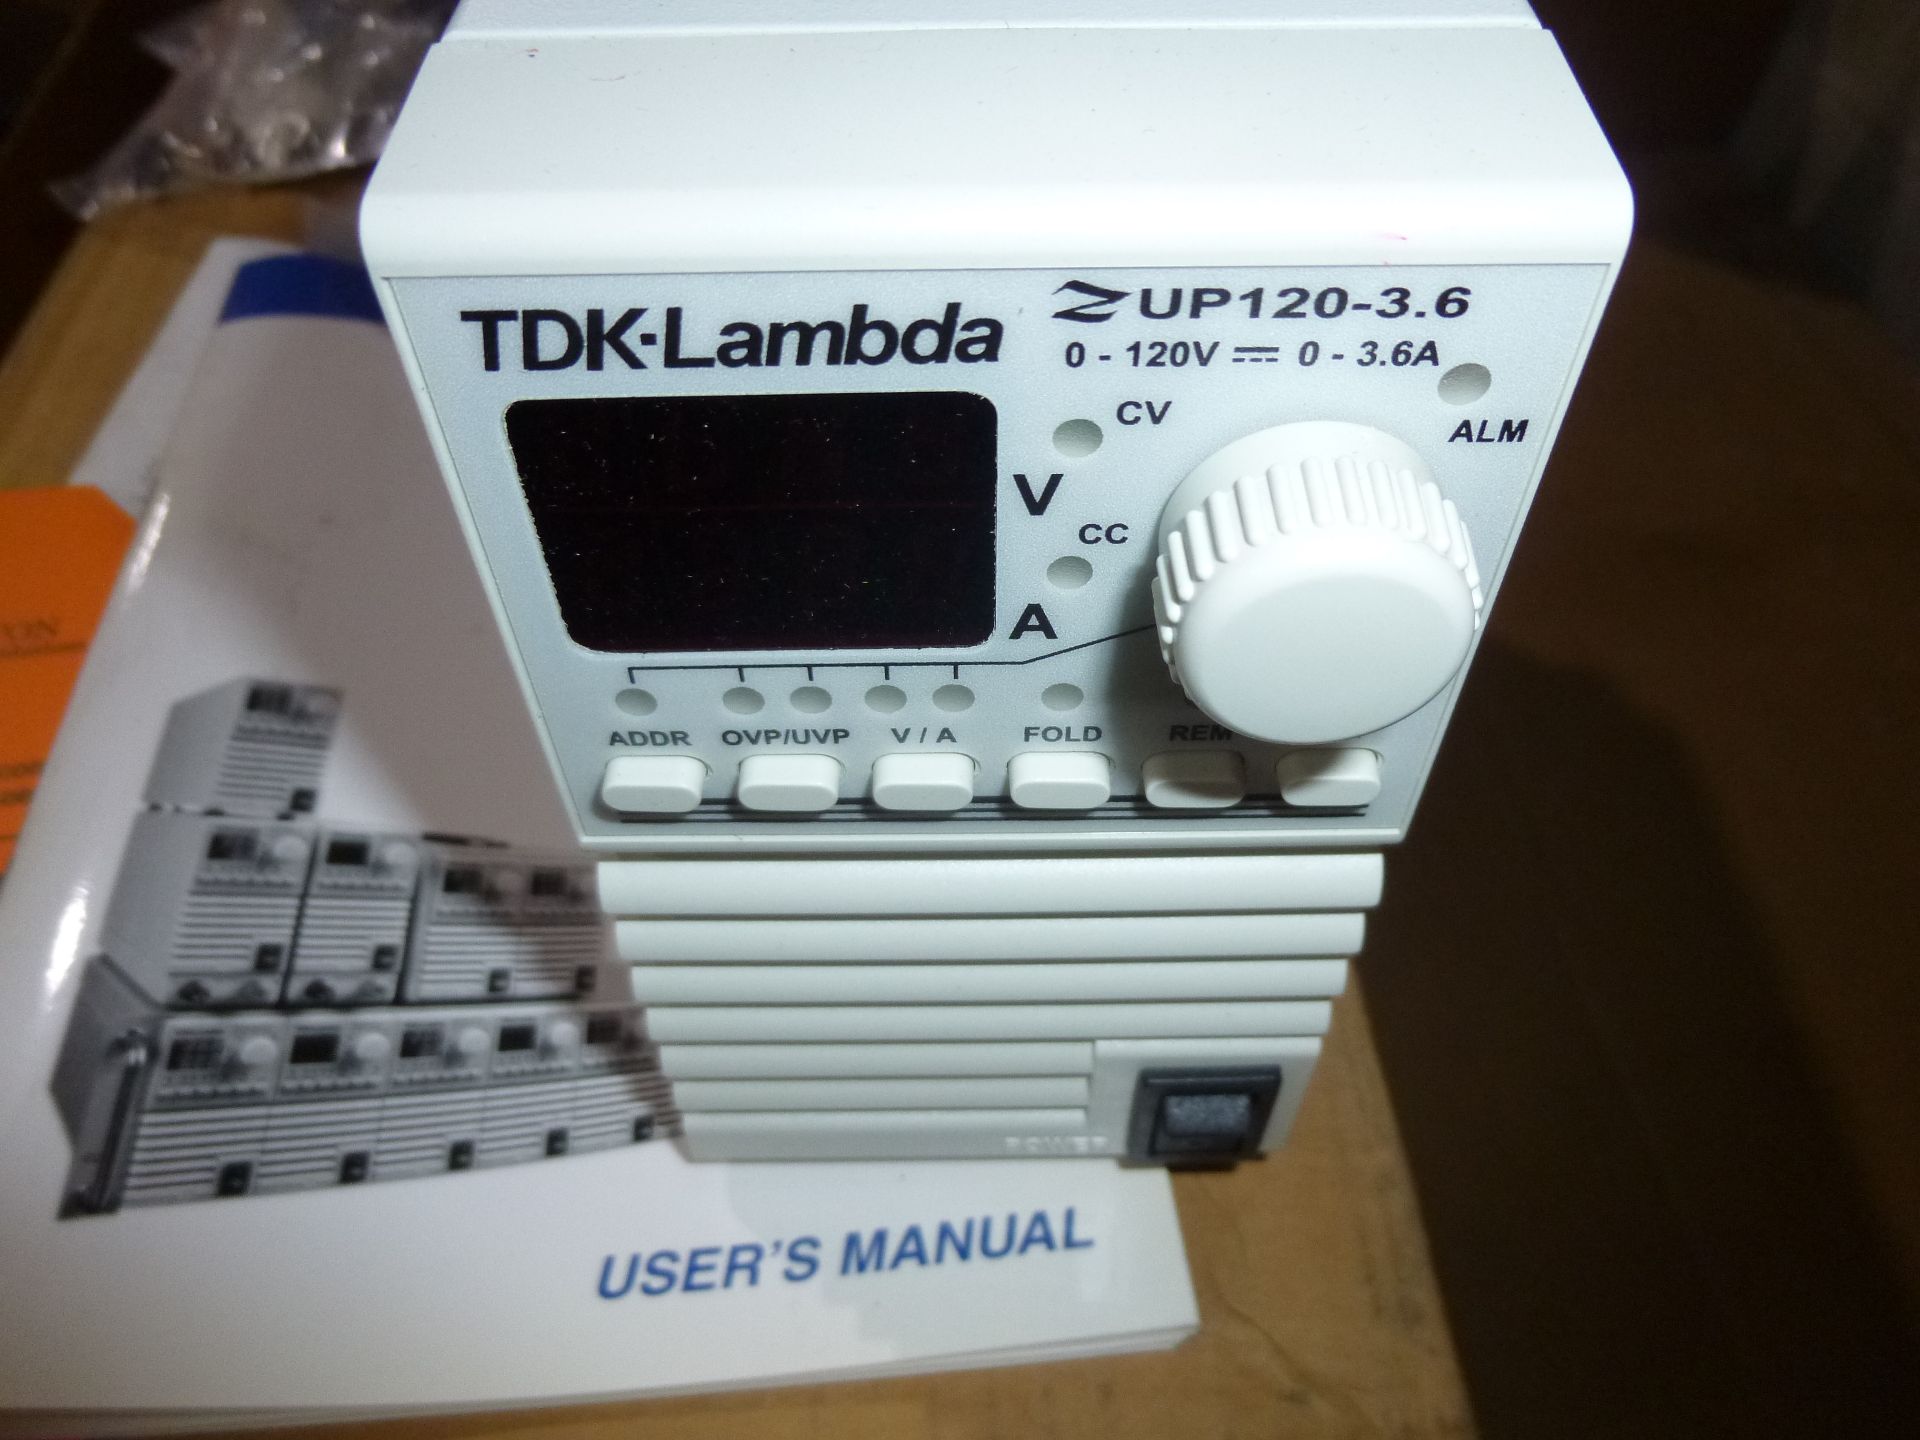 TDK-Lambda power supply model ZUP120-3.6, new in box, as always with Brolyn LLC auctions, all lots - Image 2 of 2